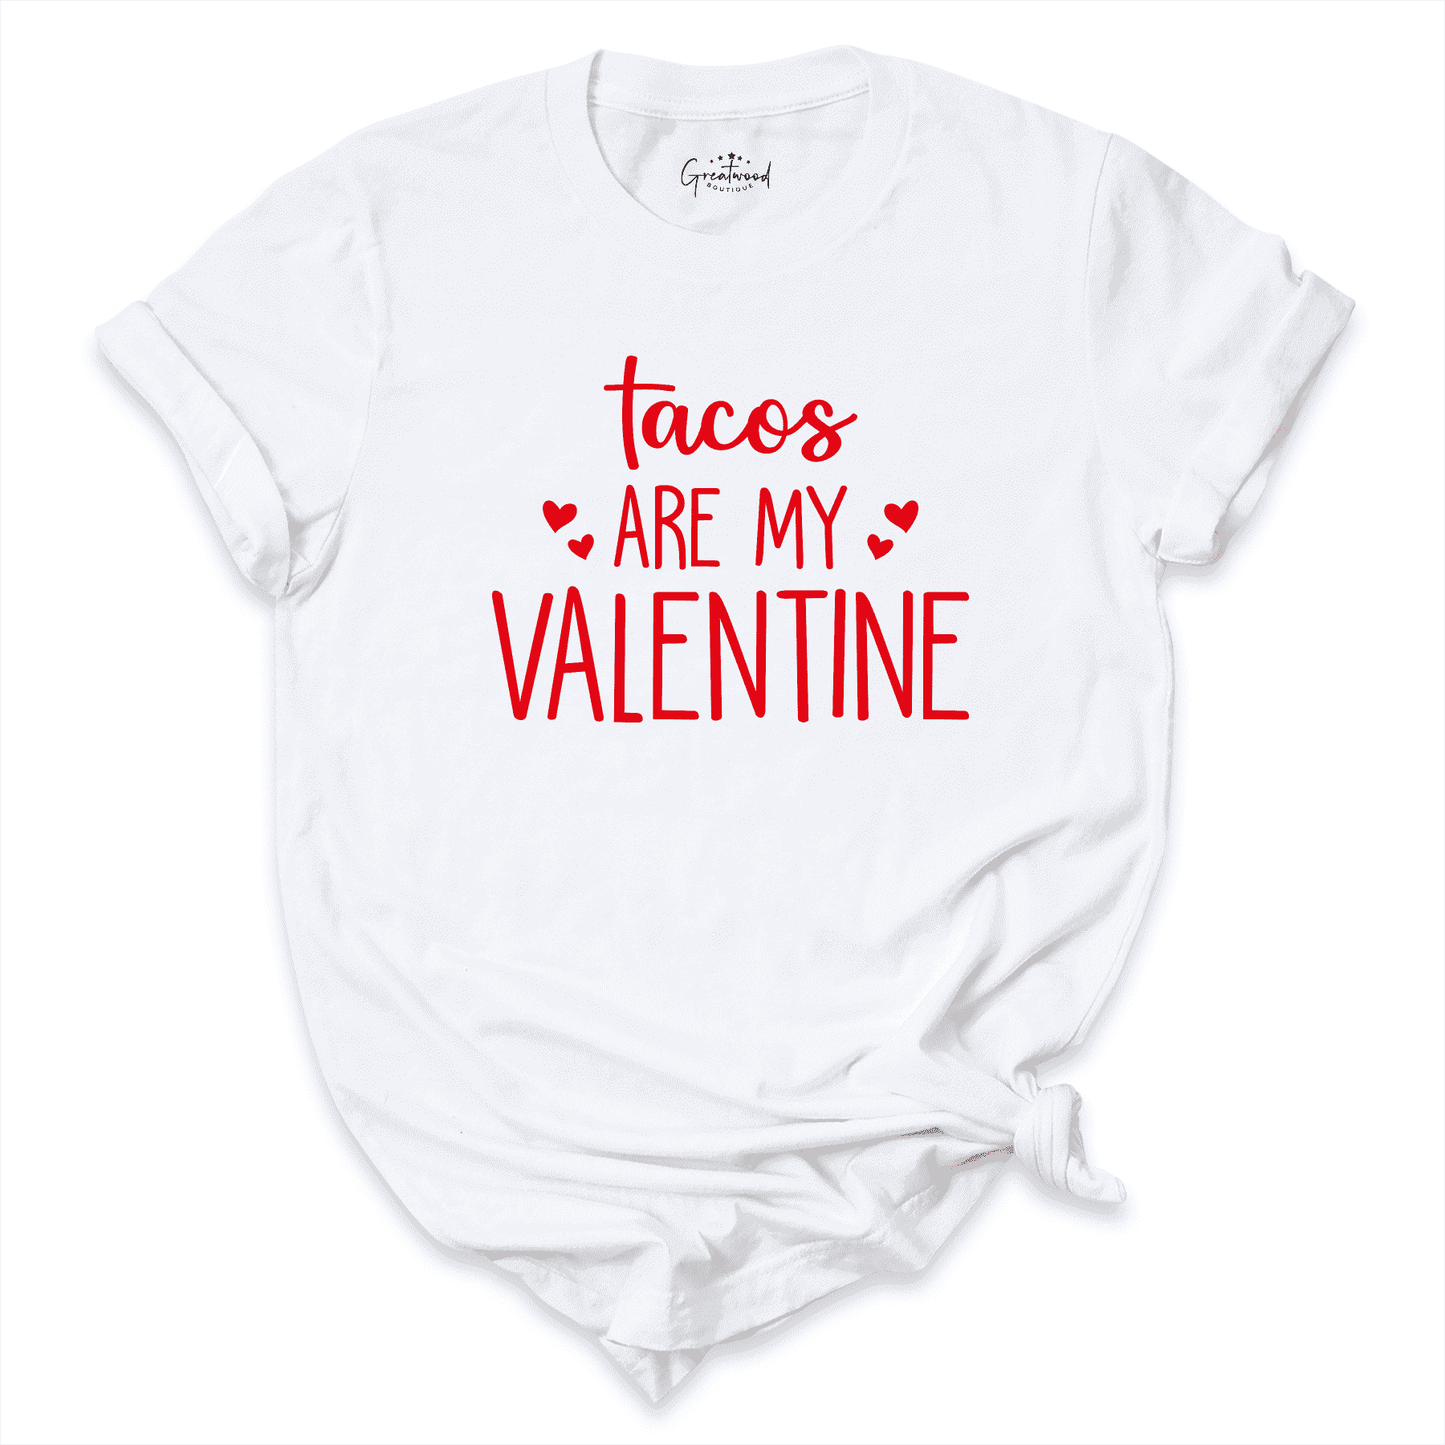 Tacos Are My Valentine Shirt